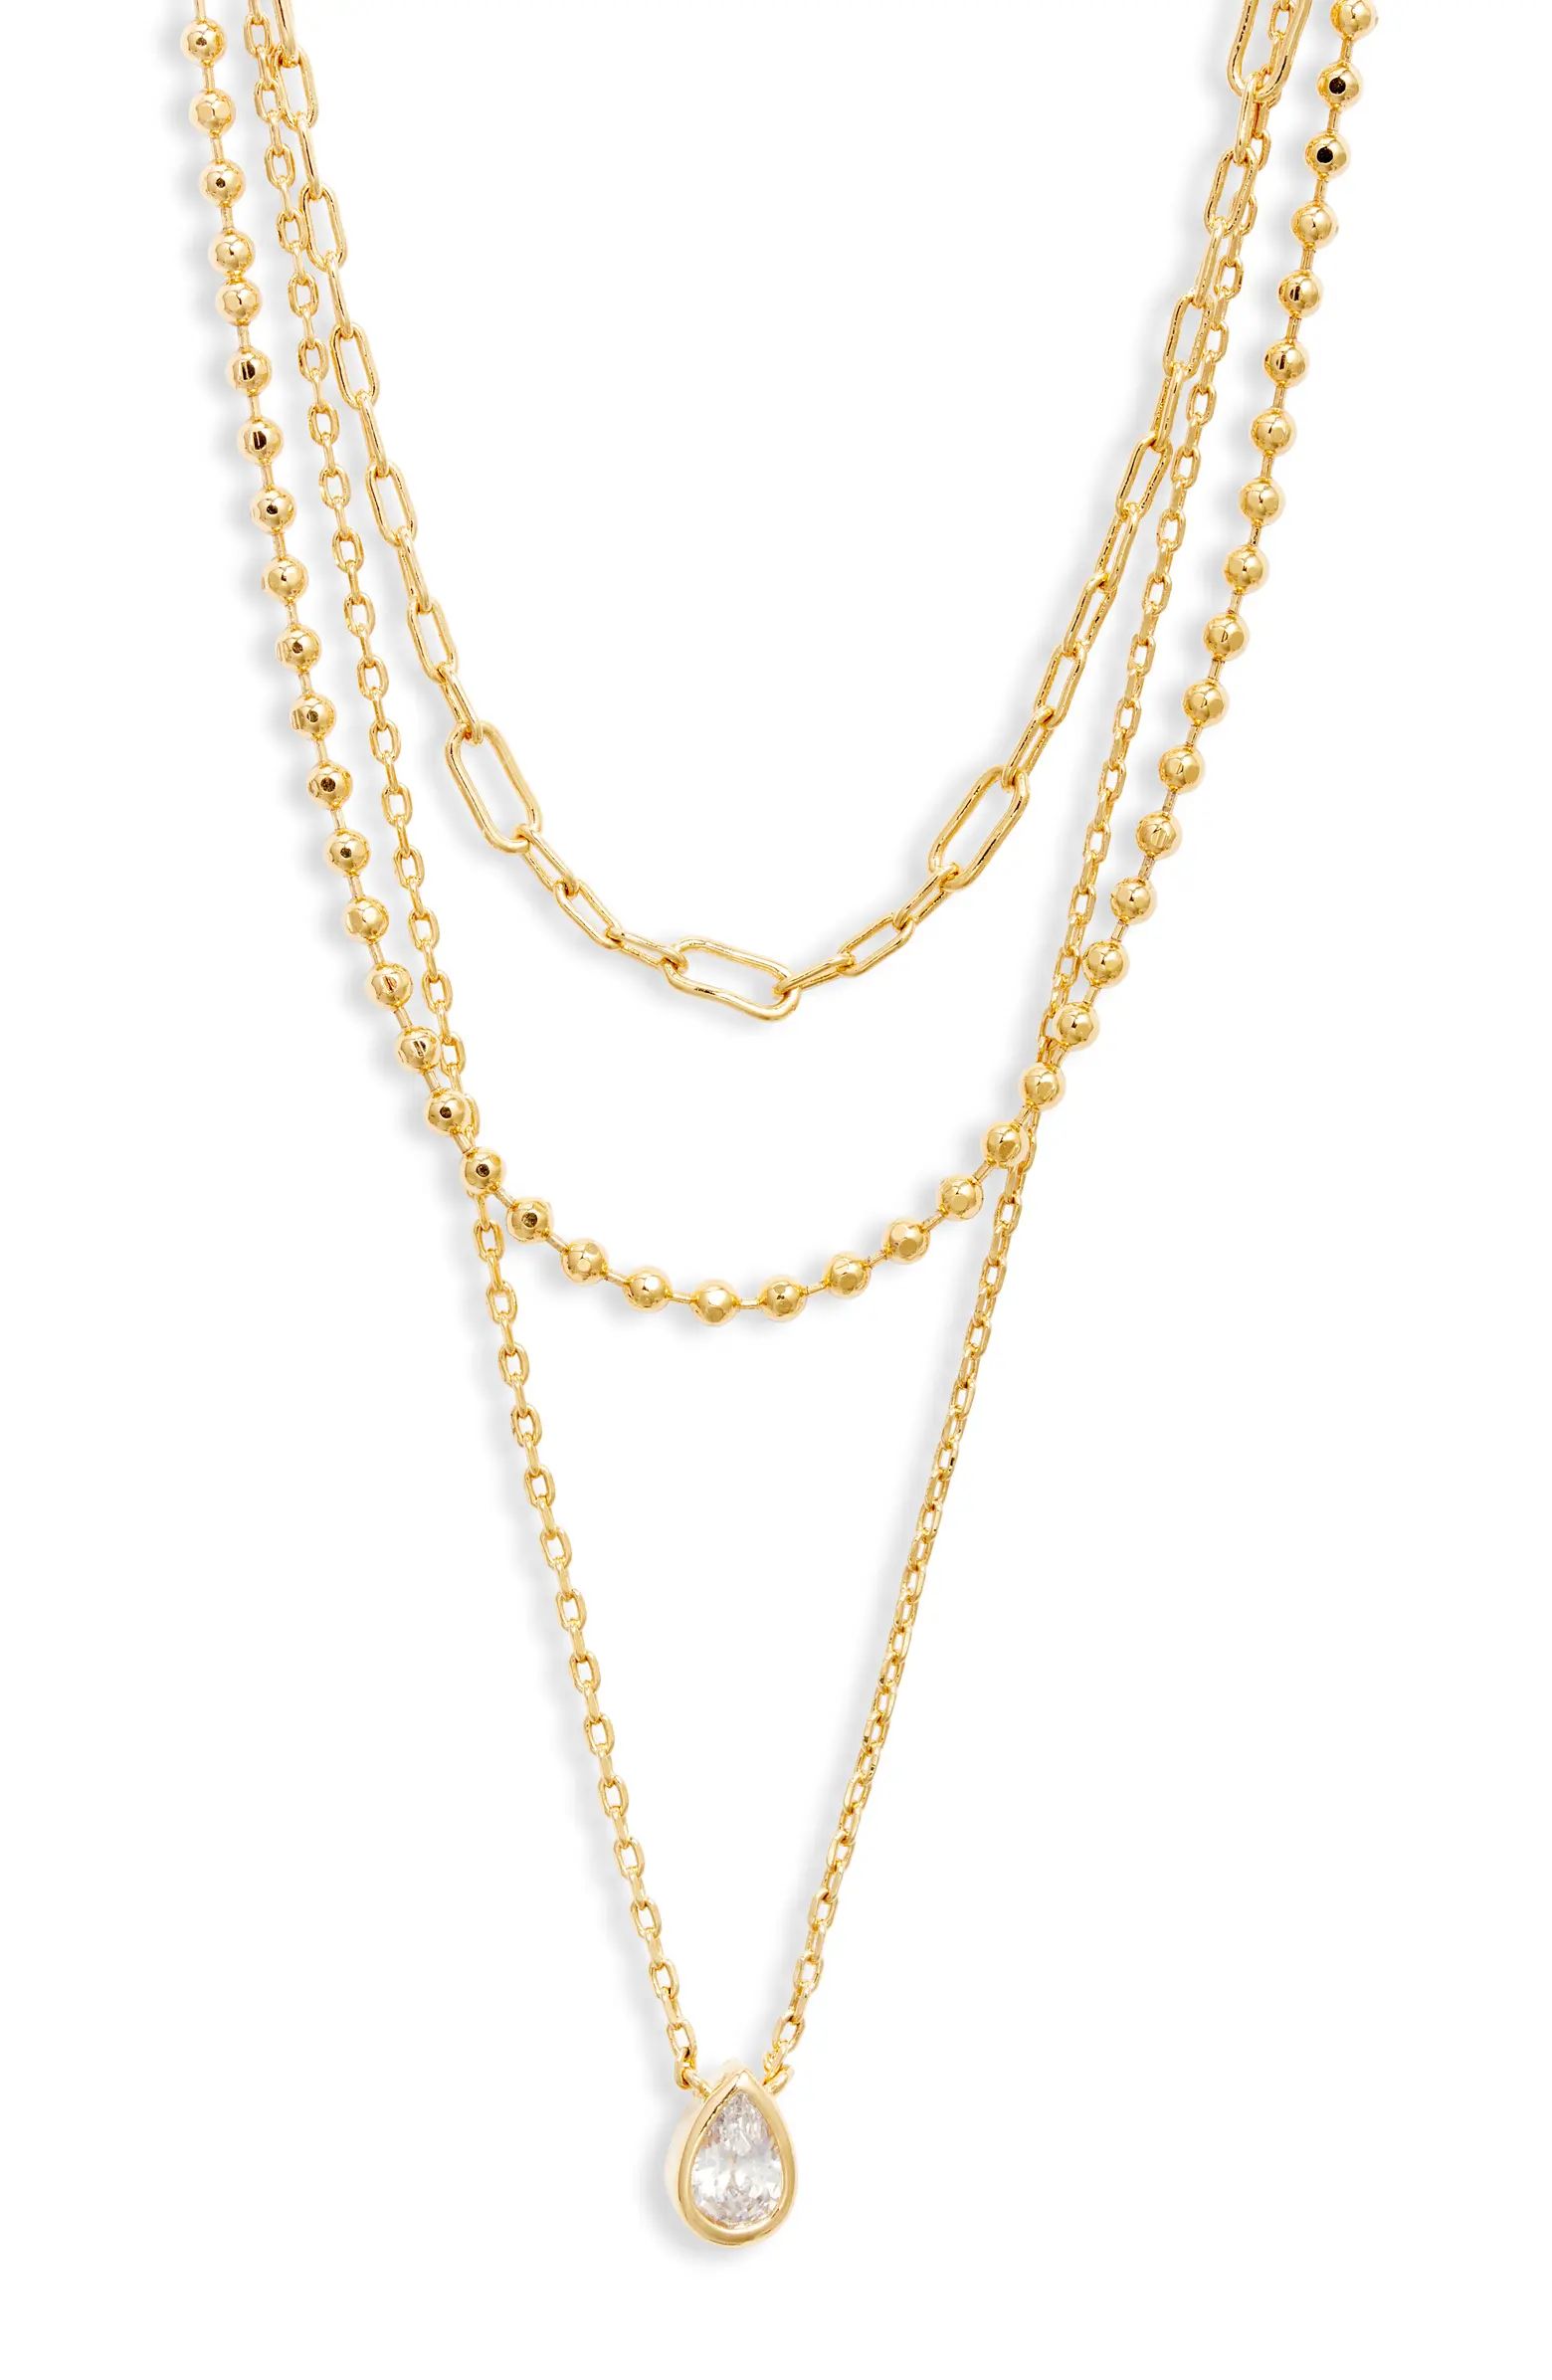 Demi Fine Dainty Layered Pendant Necklace | Nordstrom